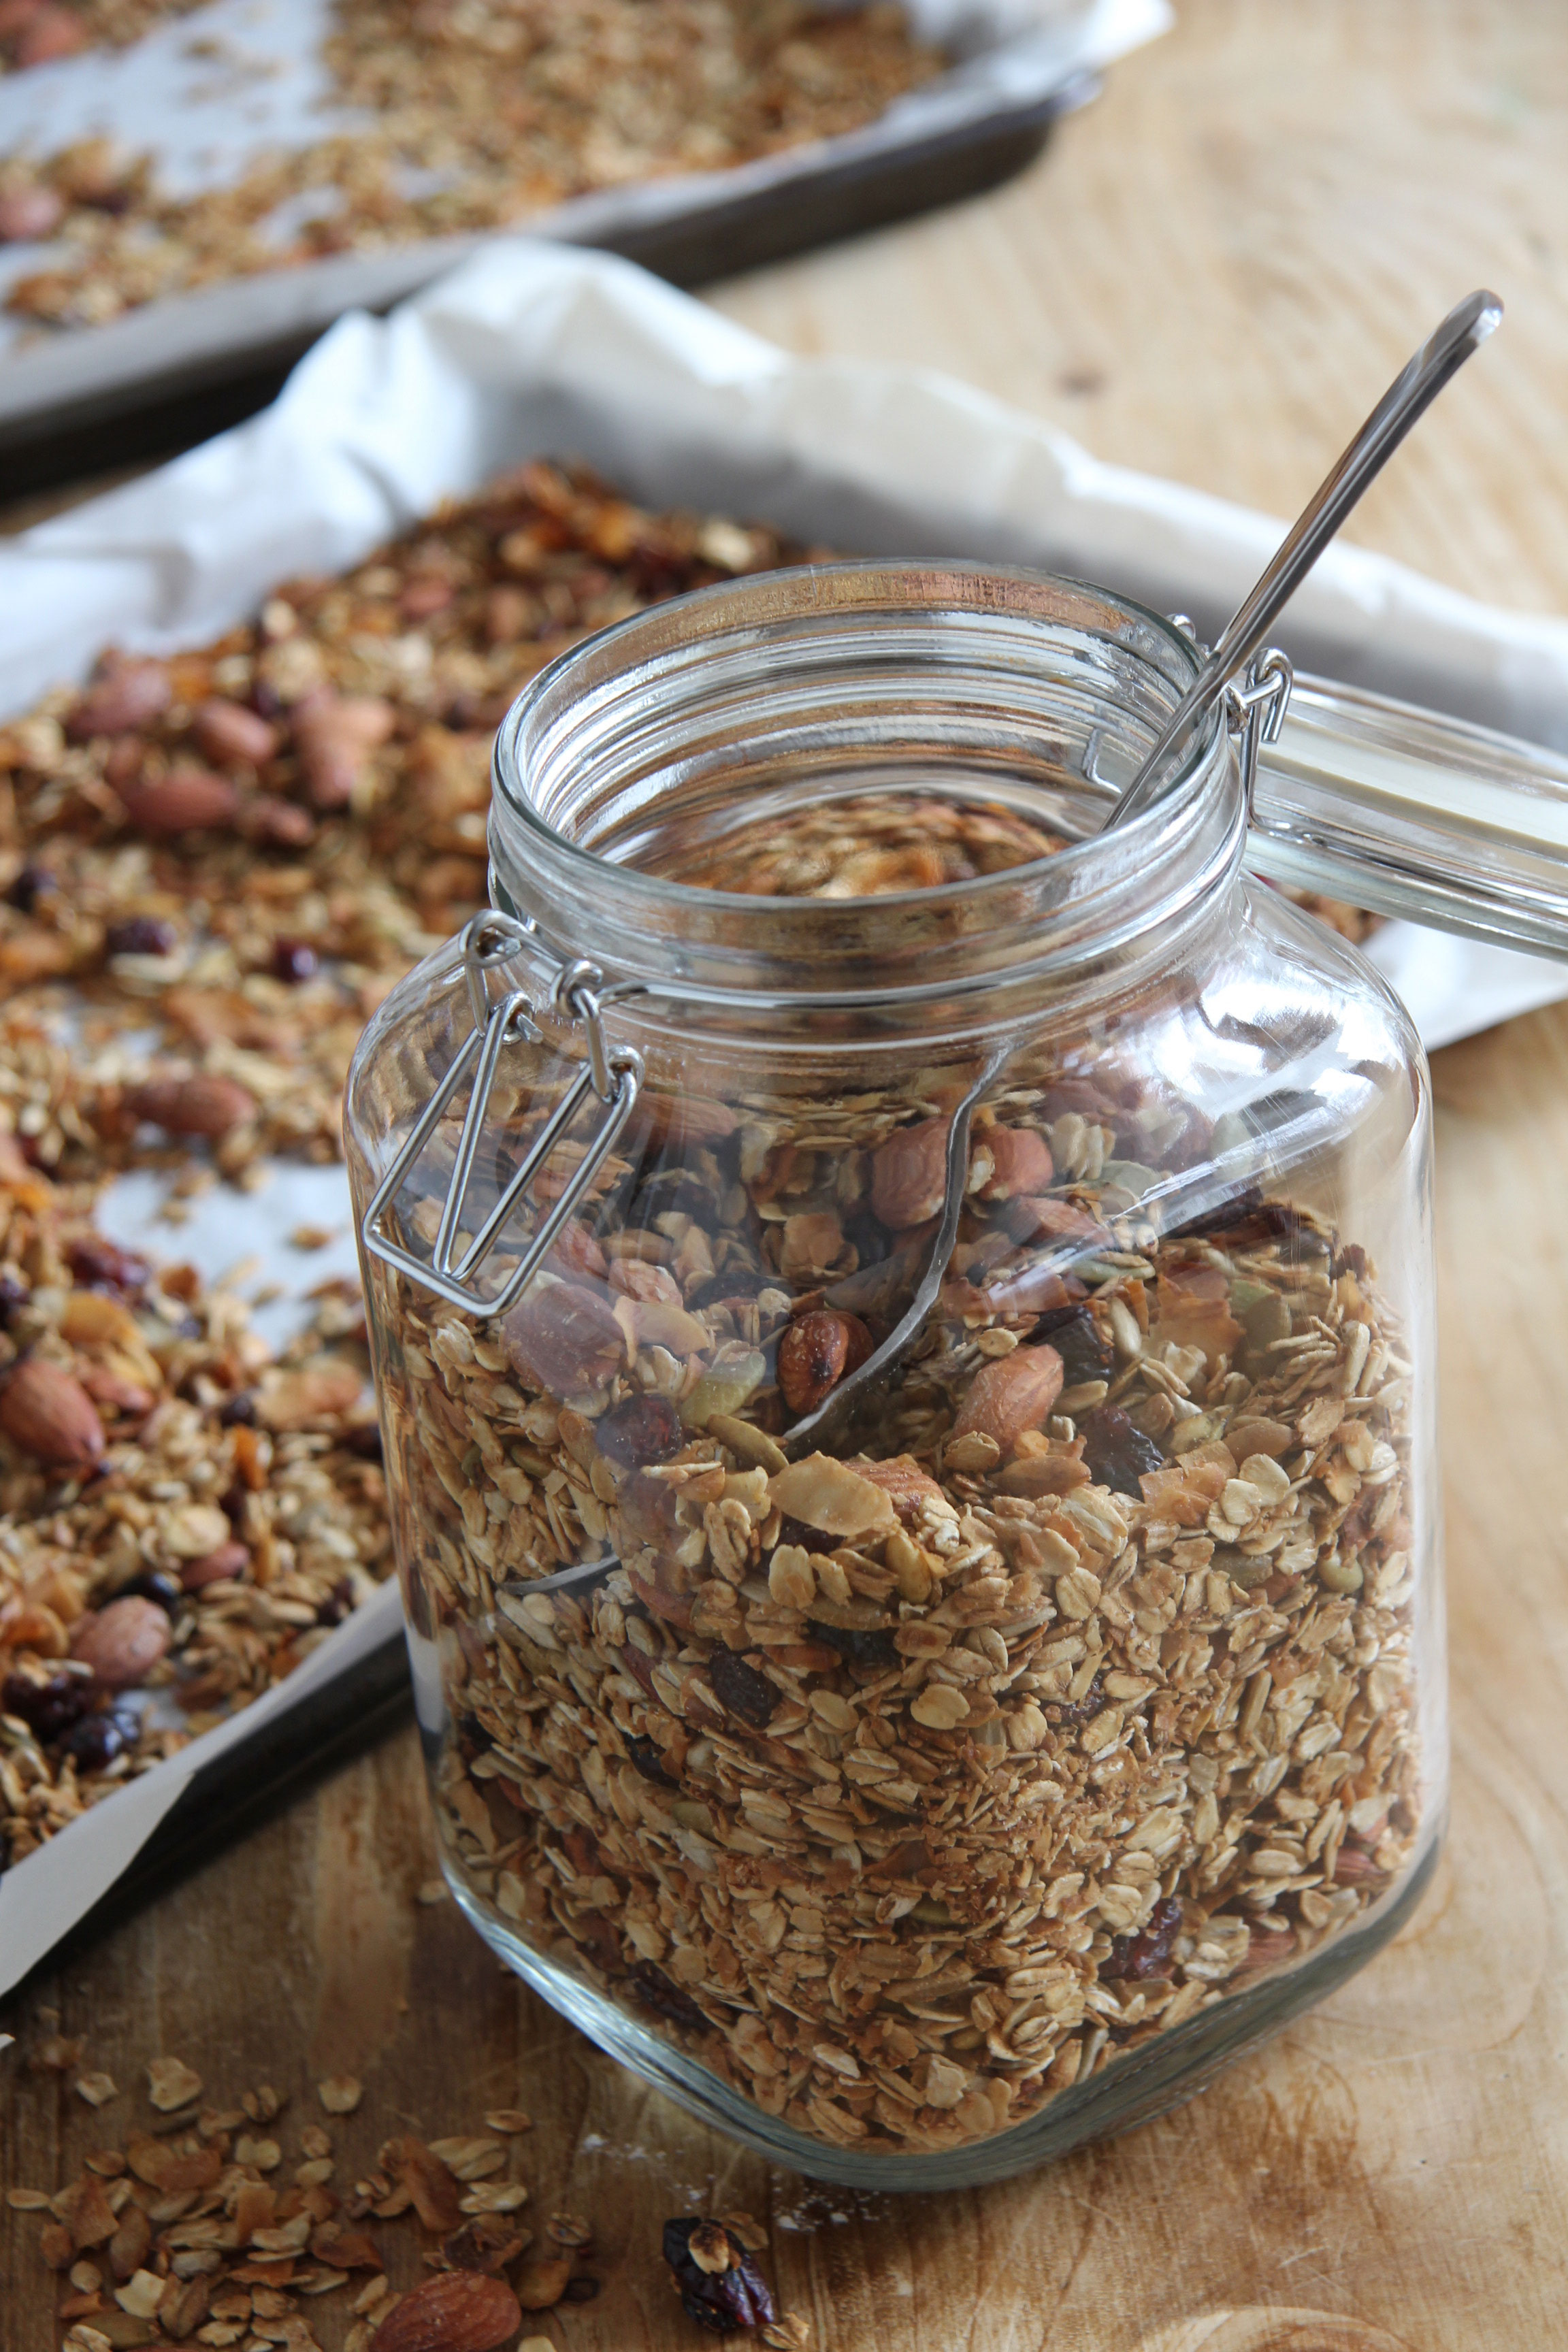 Making your own granola is super easy! Try this Homemade Gluten Free Granola recipe for your morning breakfast or a snack on the go!